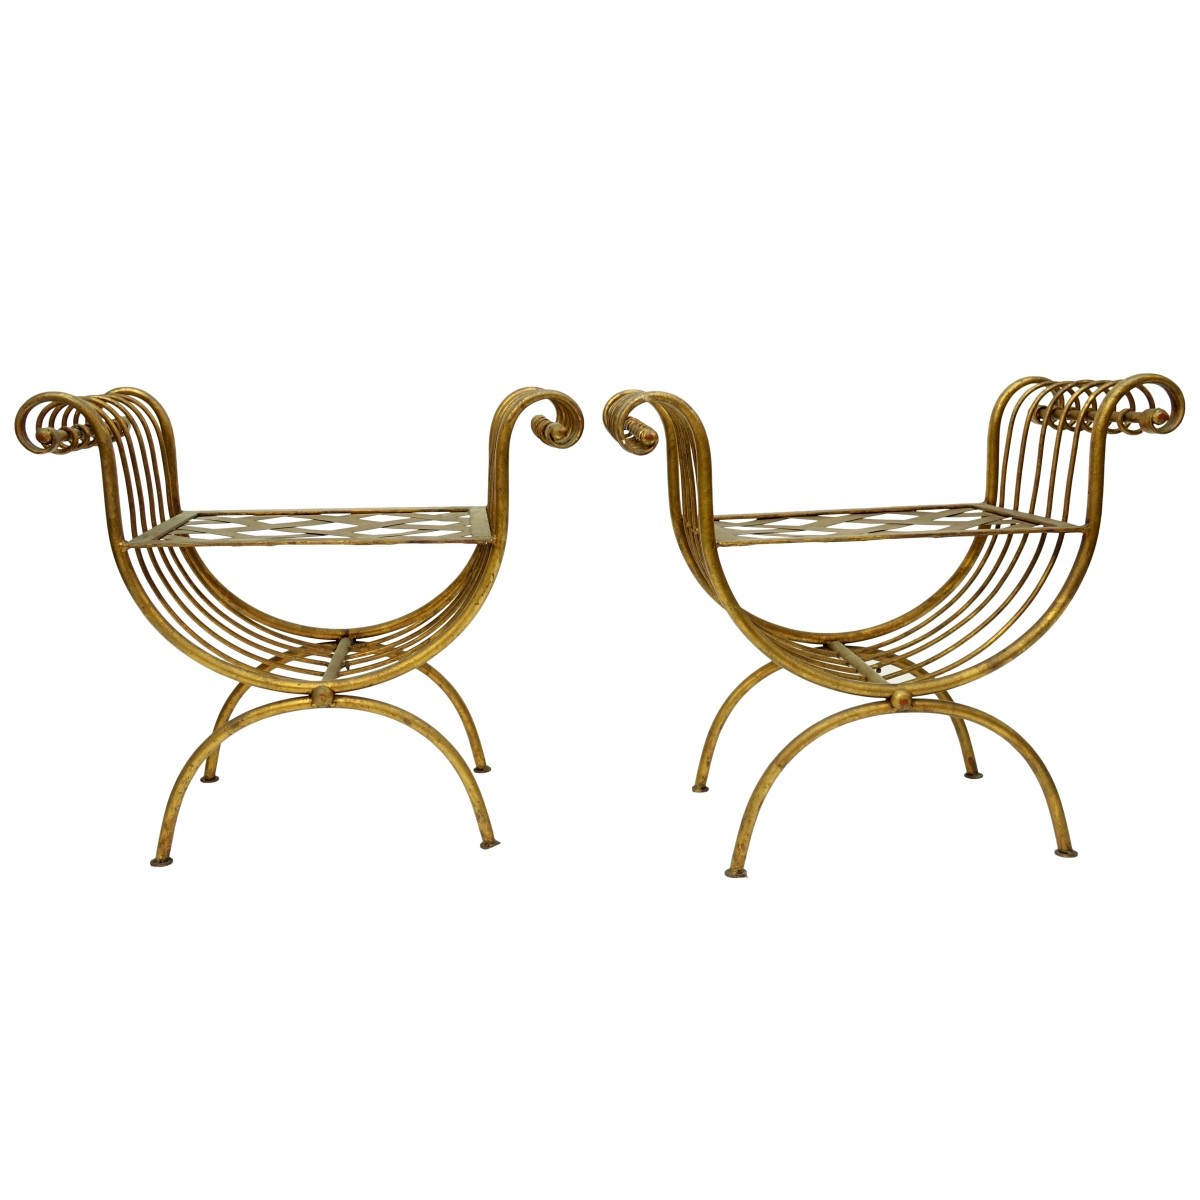 Neoclassical Style Gilt Metal Benches